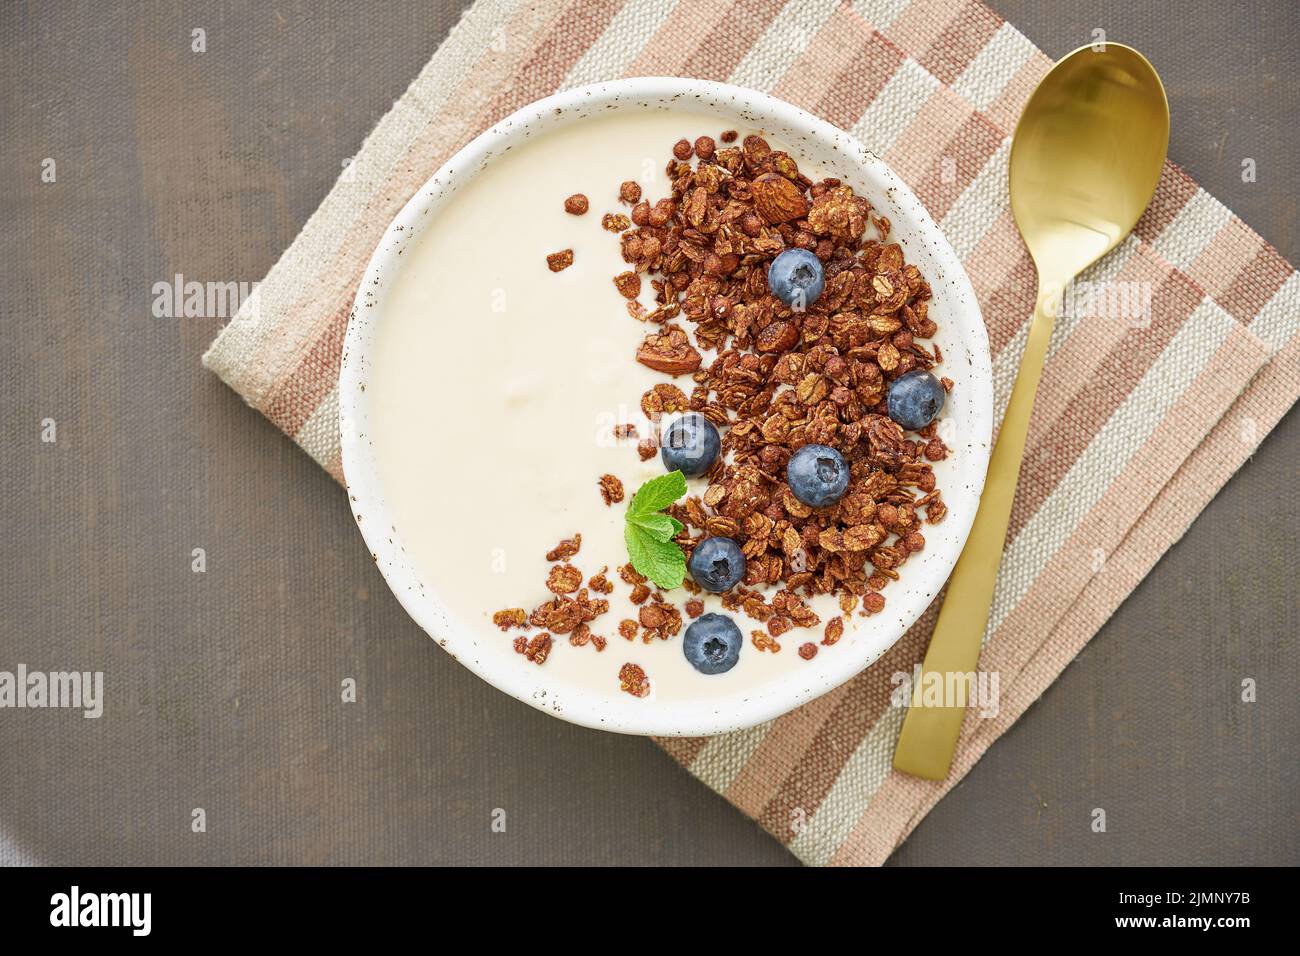 Yogurt with chocolate granola, bilberry. Breakfast on a brown table, top view Stock Photo